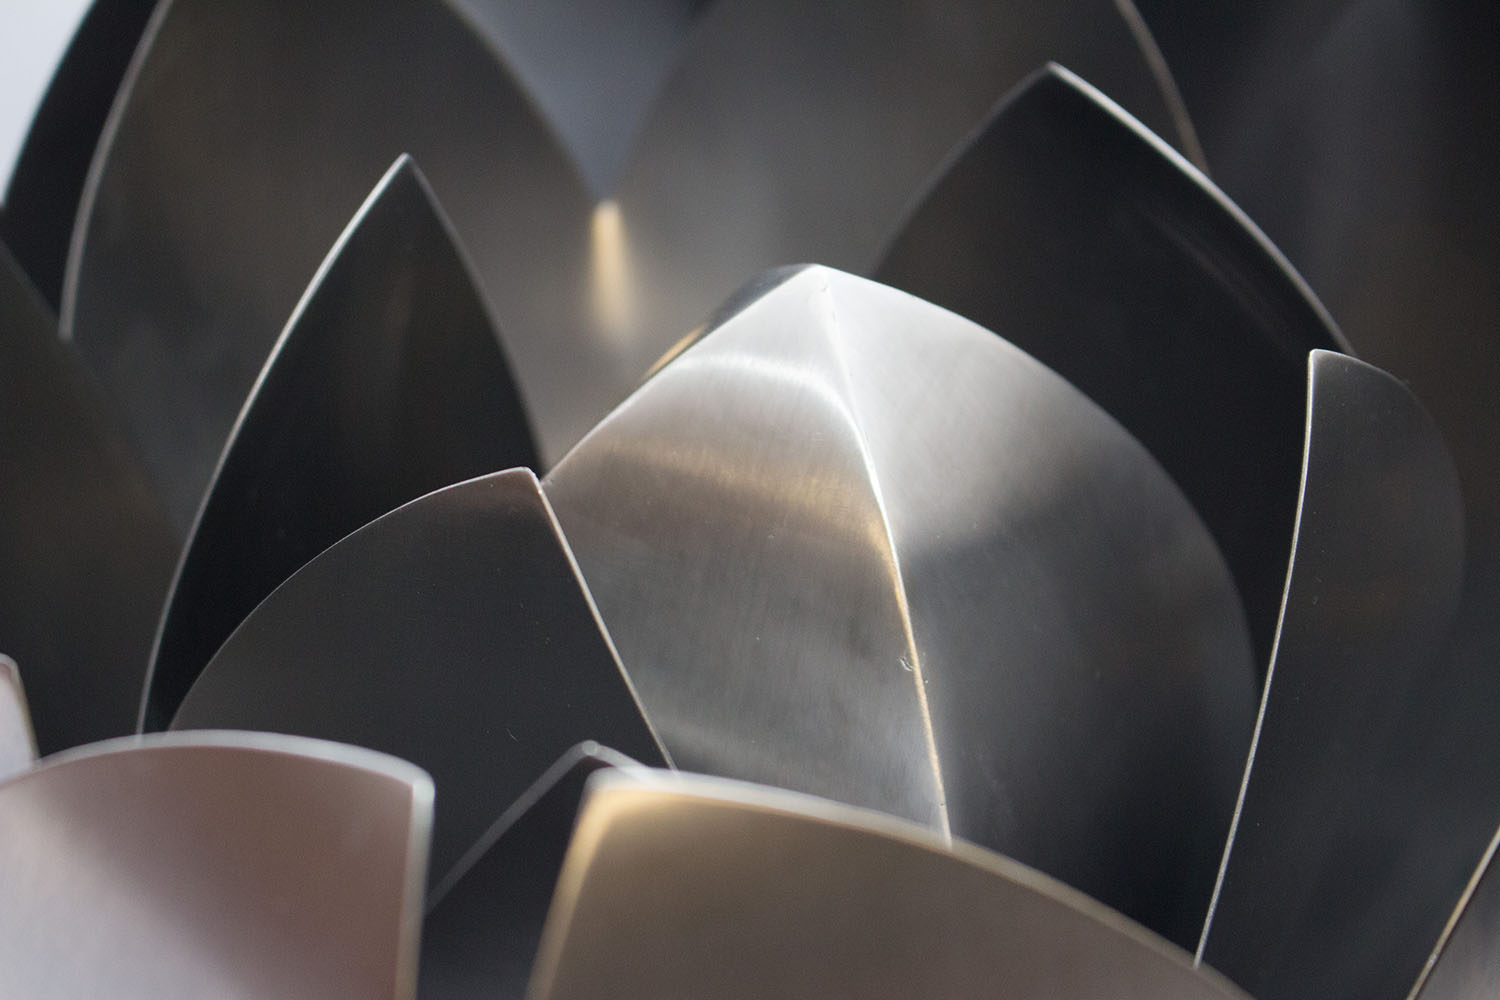 Stainless steel metal wall art abstract sculpture - Multiples Suns 2016